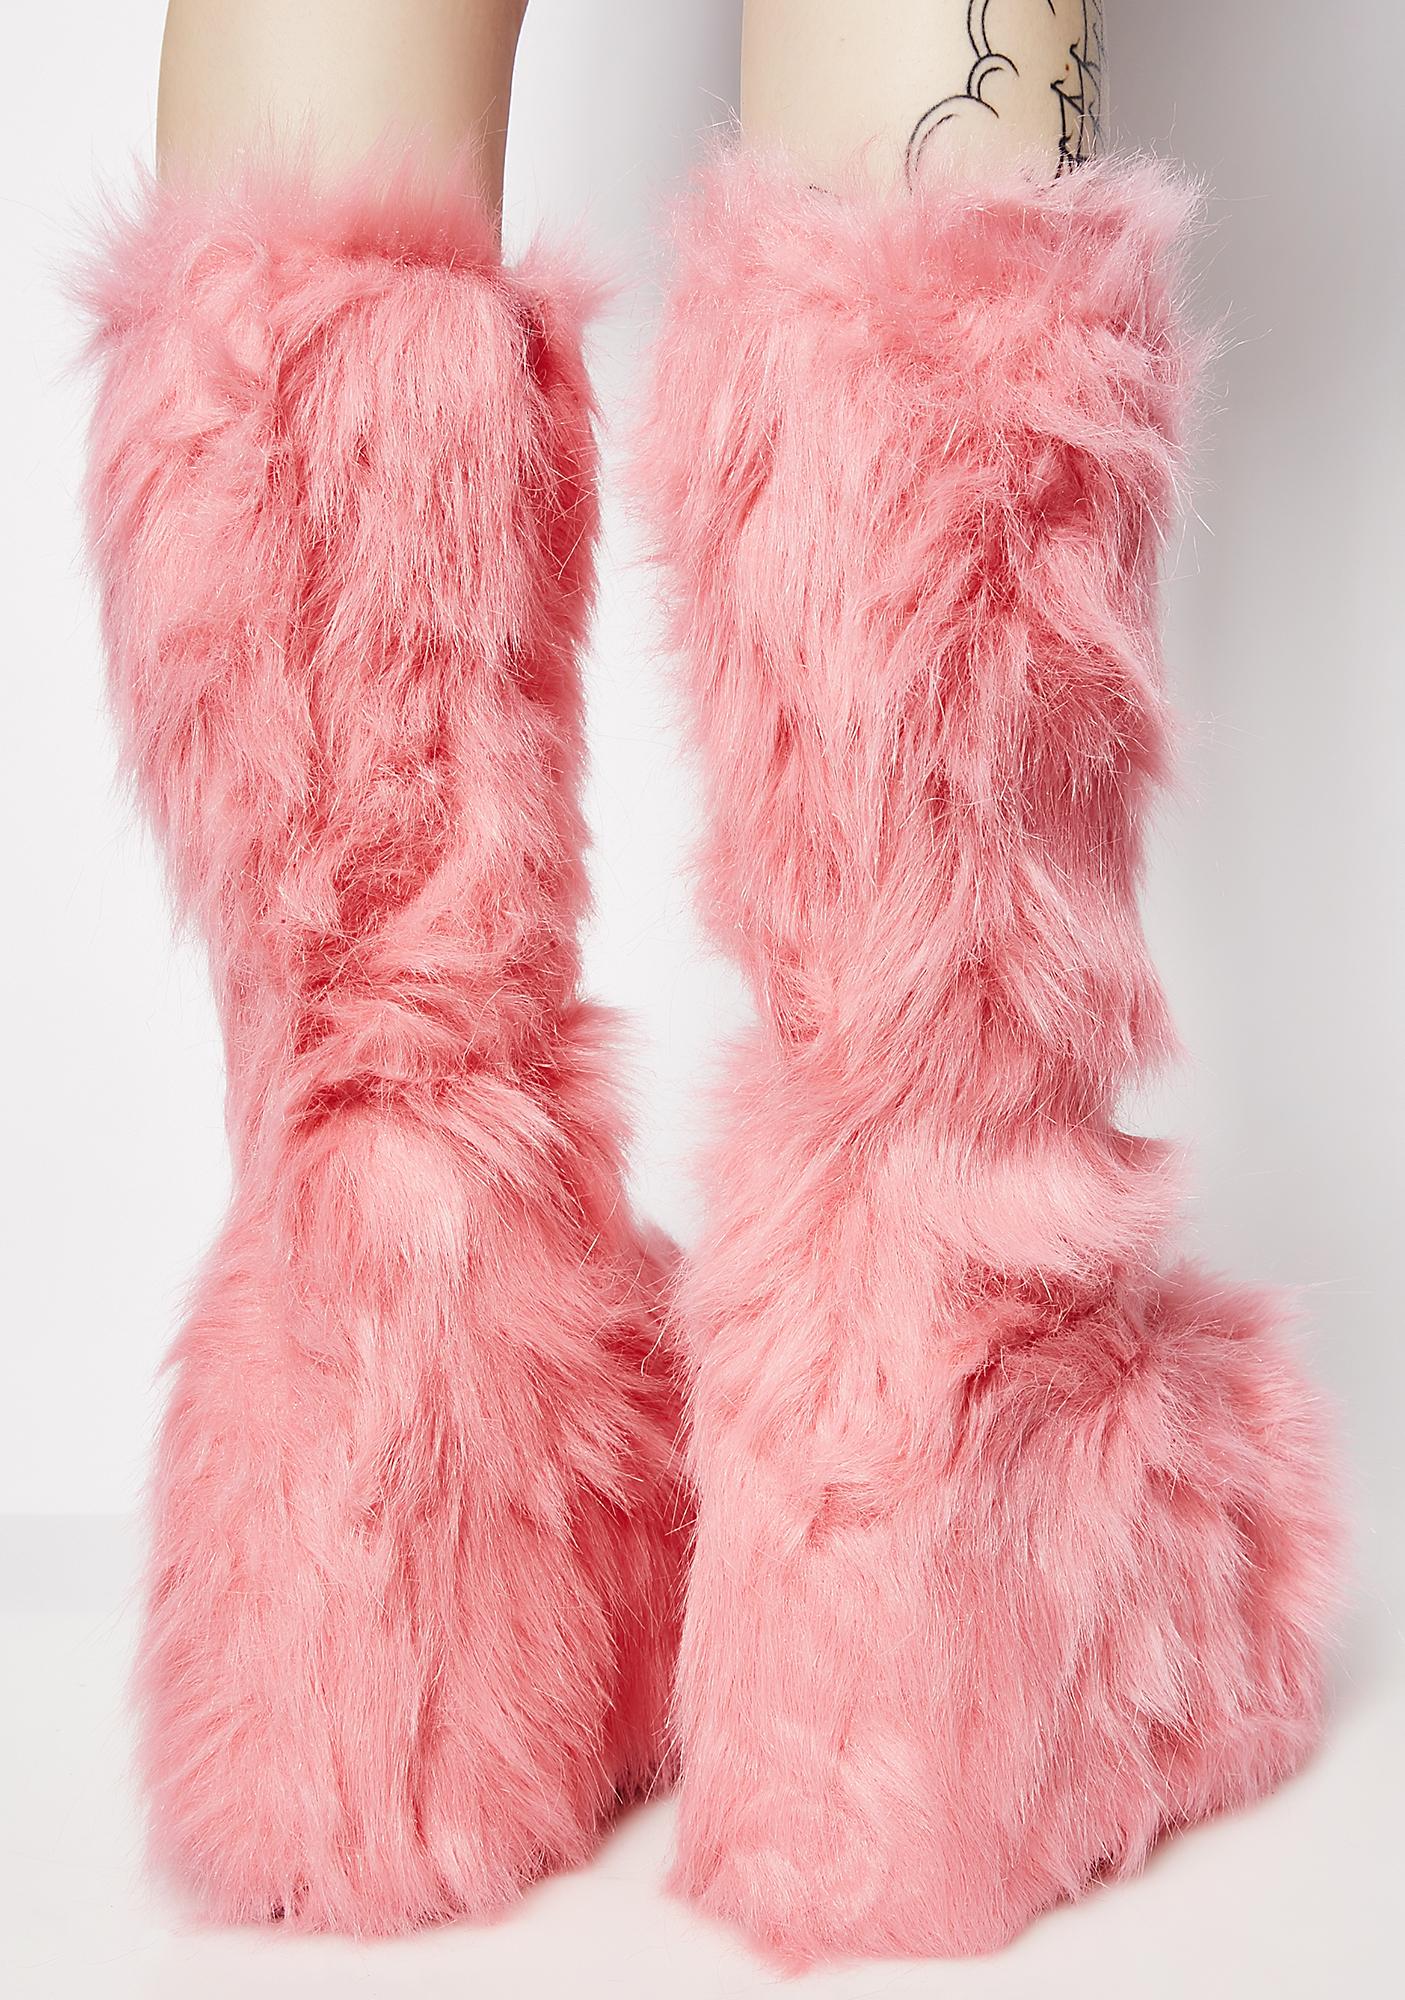 fuzzy pink shoes